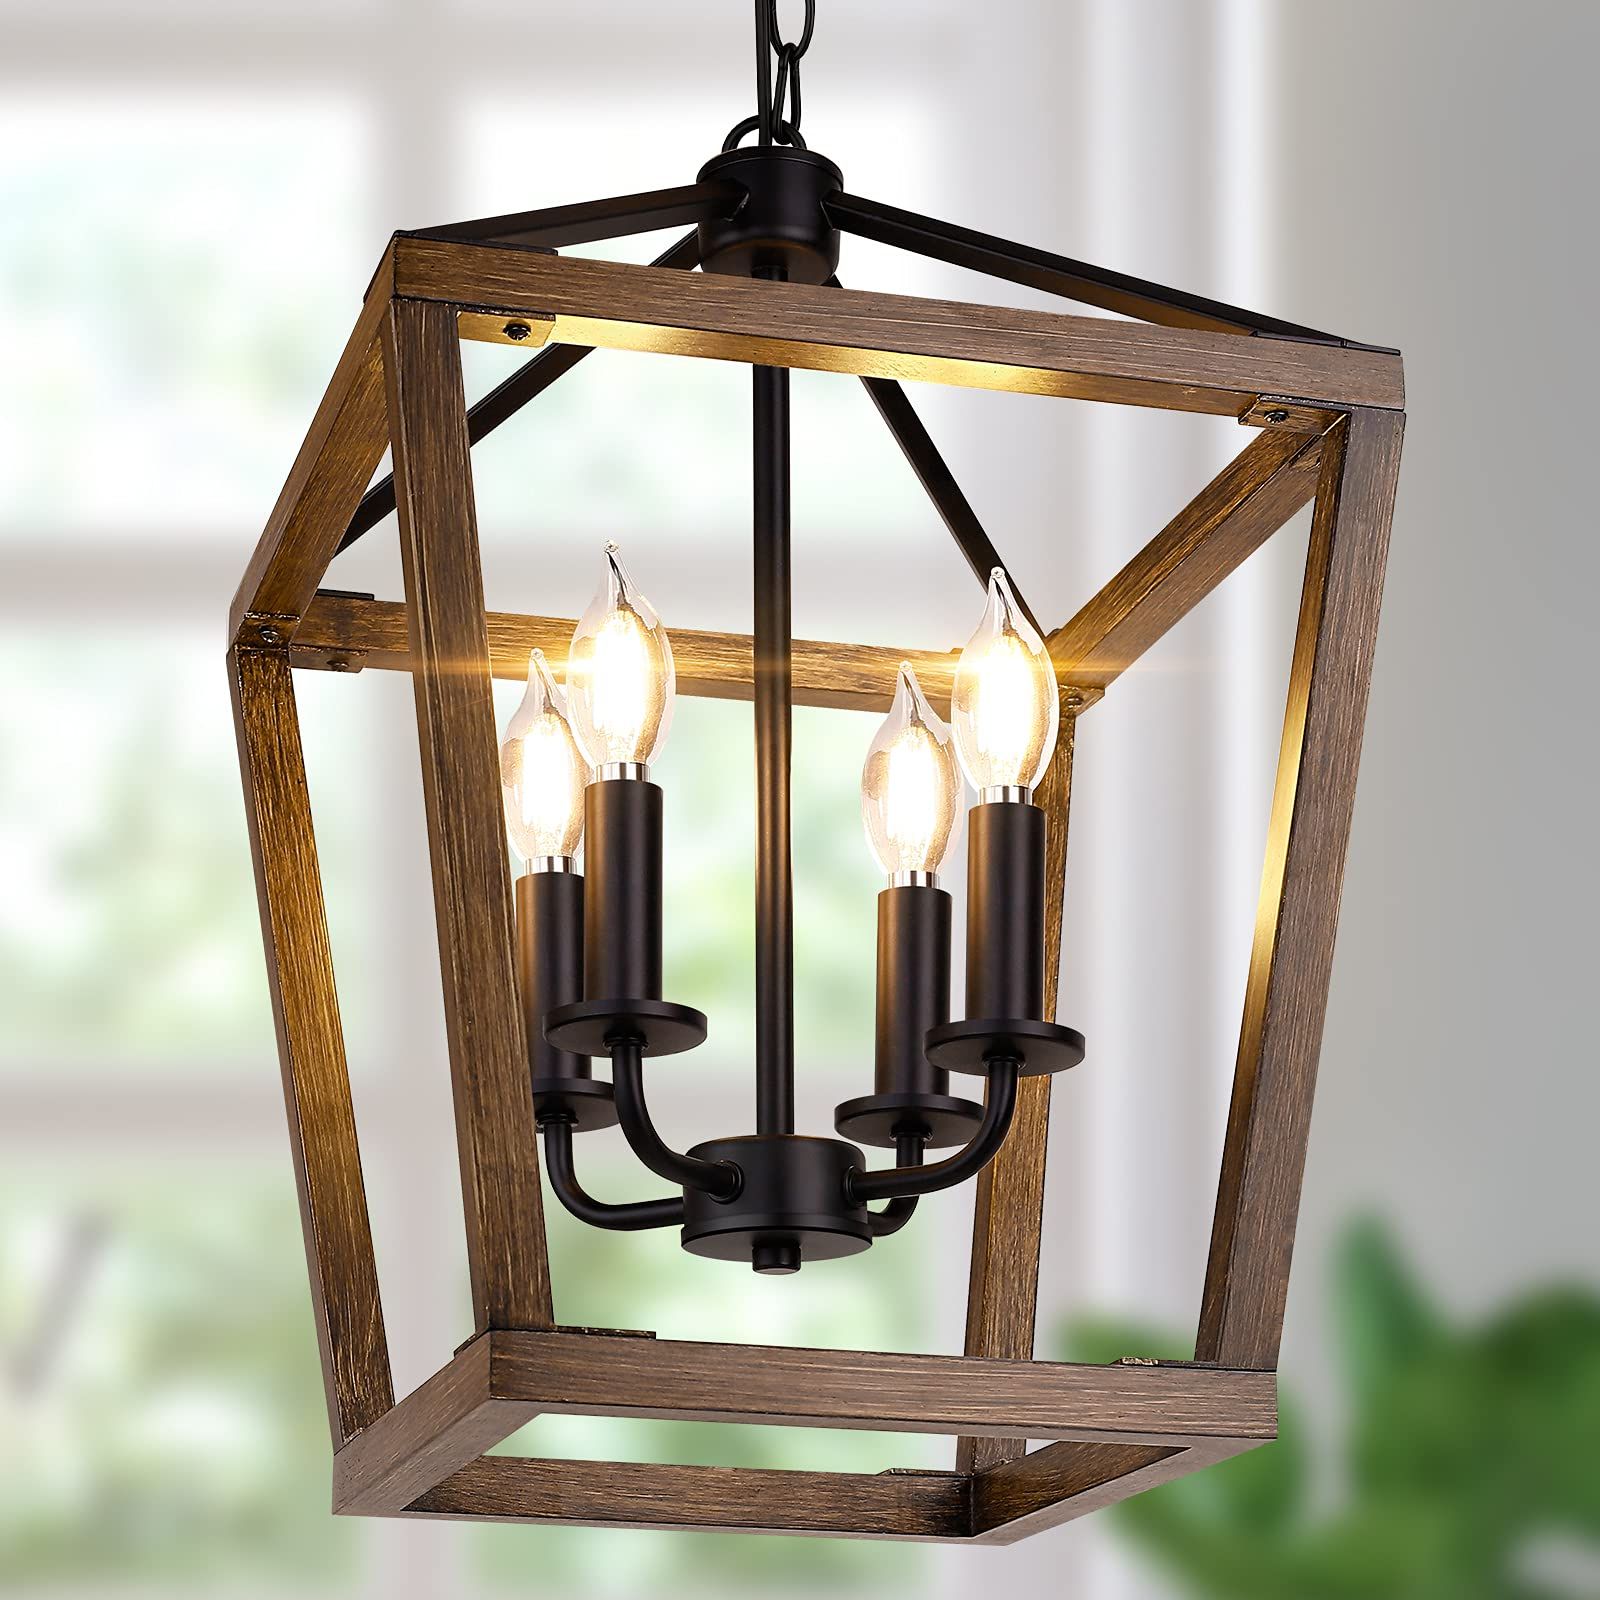 Famous Farmhouse Chandelier Light Fixture For Kitchen Dining Room, 4 Light Rustic  Pendant Hanging Ceiling Light Height Adjustable In Oak Wood Finish, Cage Lantern  Lighting With E12 Base For Hallway Foyer – – Amazon Pertaining To Distressed Oak Lantern Chandeliers (View 2 of 15)